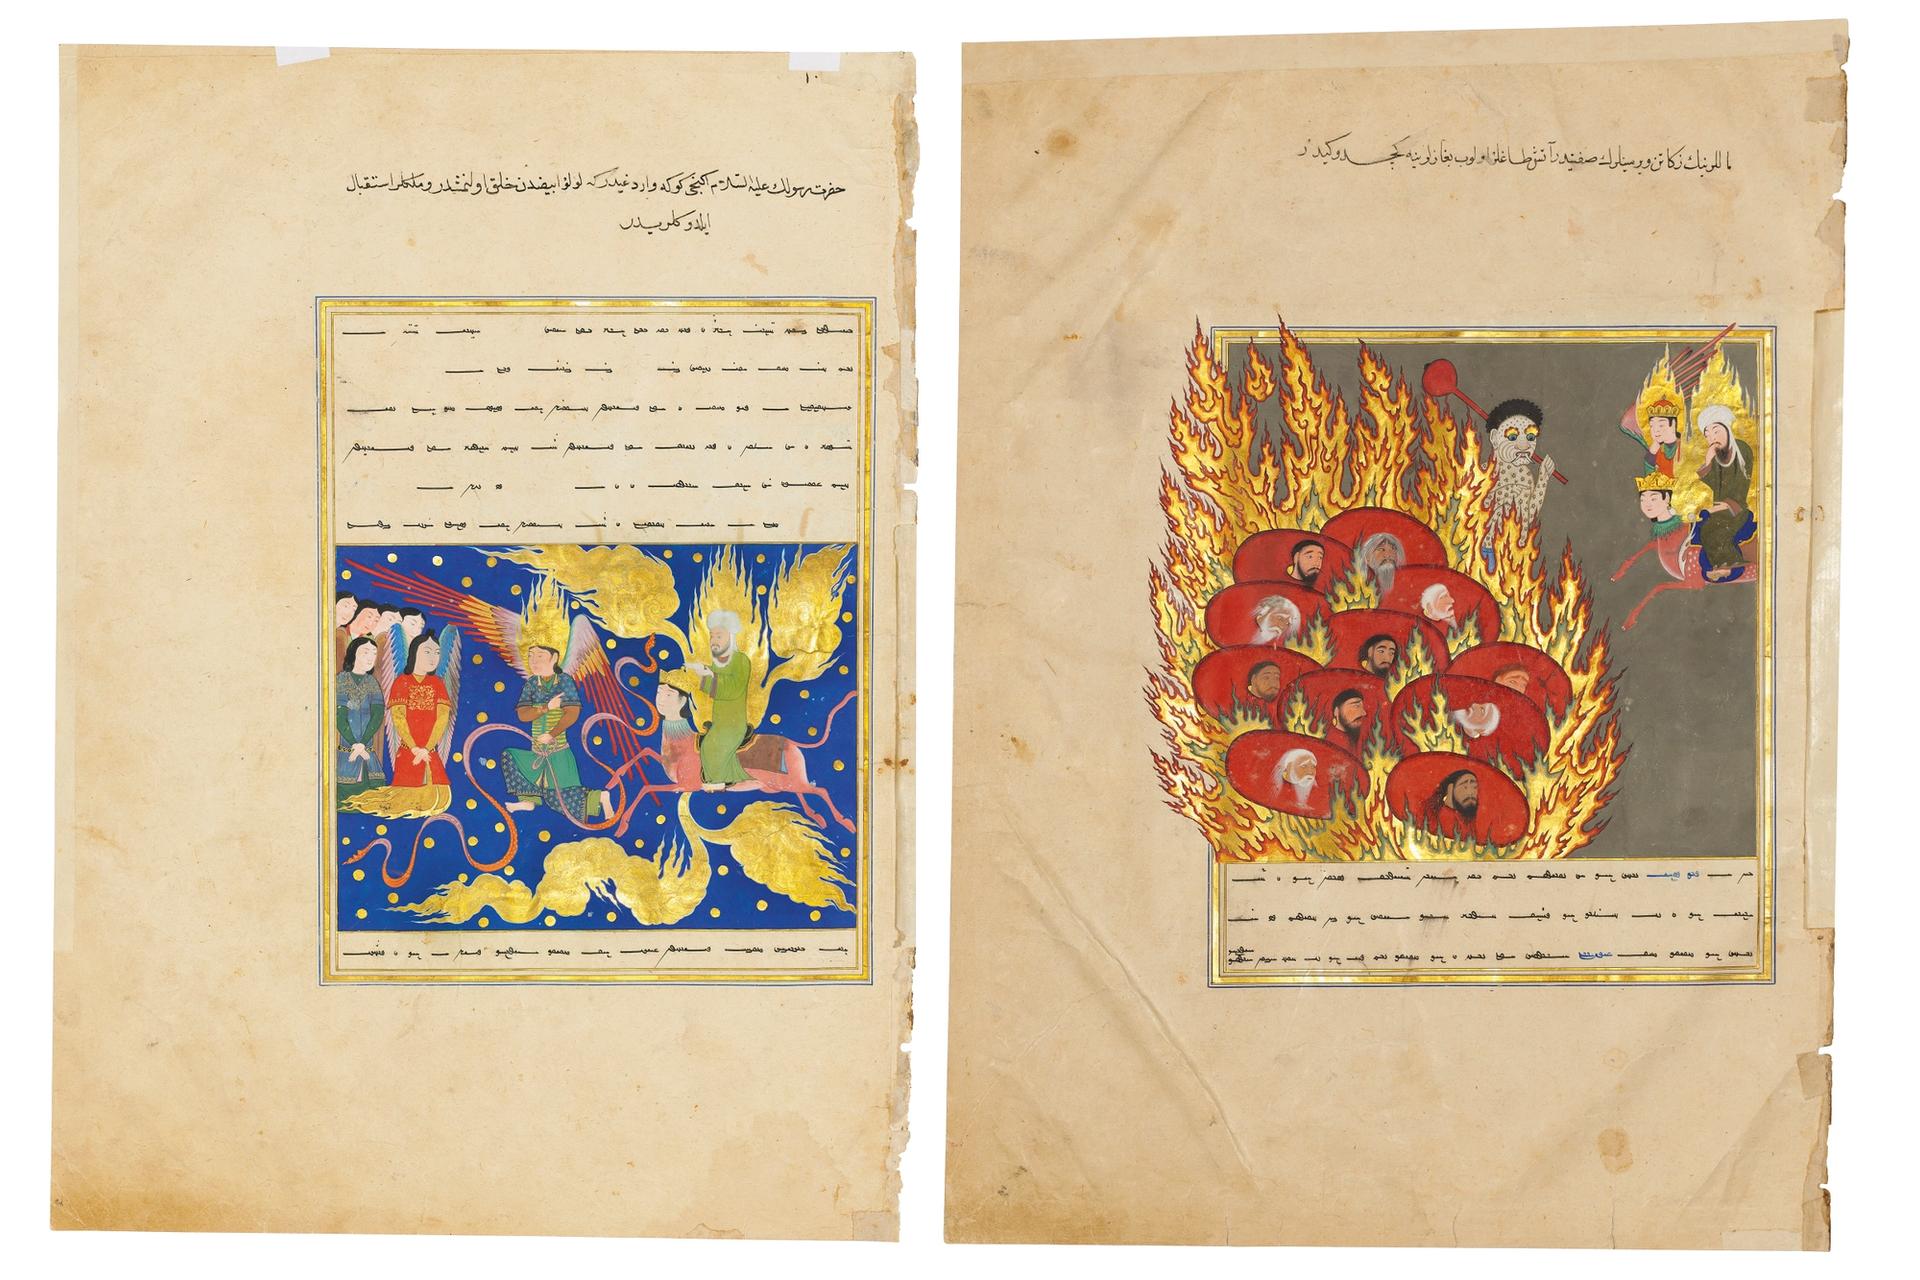 Christie's is selling two pages from a 15th-century Persian manuscript at an auction in London this week Courtesy of Christie's